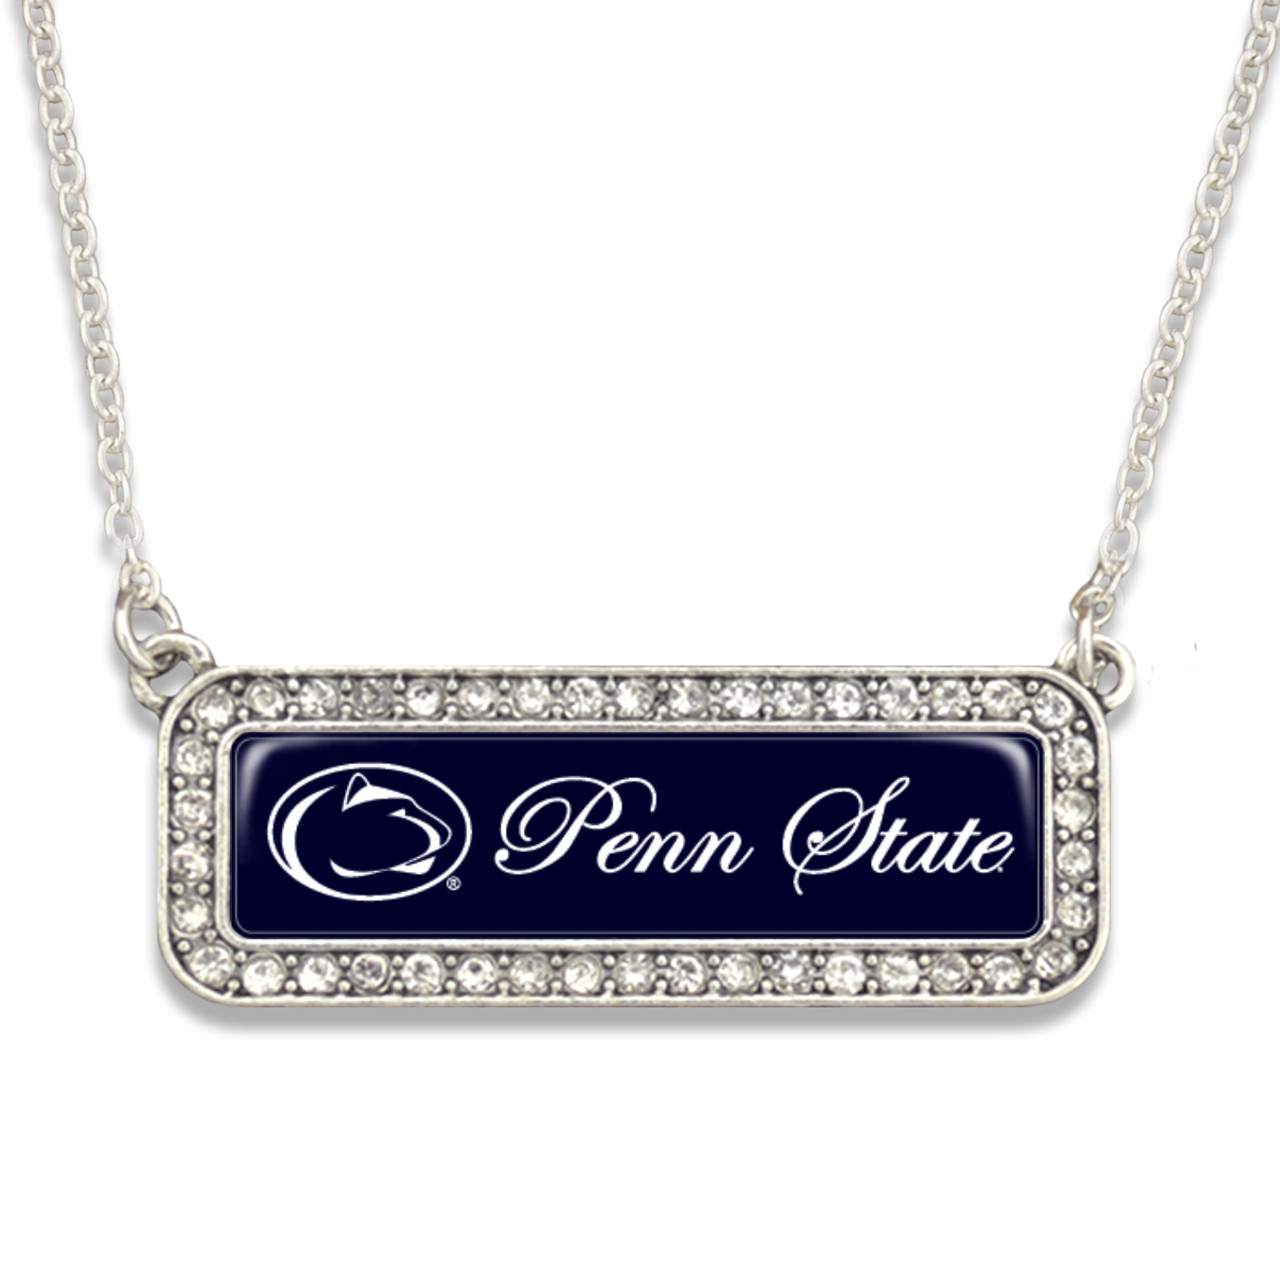 Penn State Nittany Lions Silver Crystal Name Plate Necklace